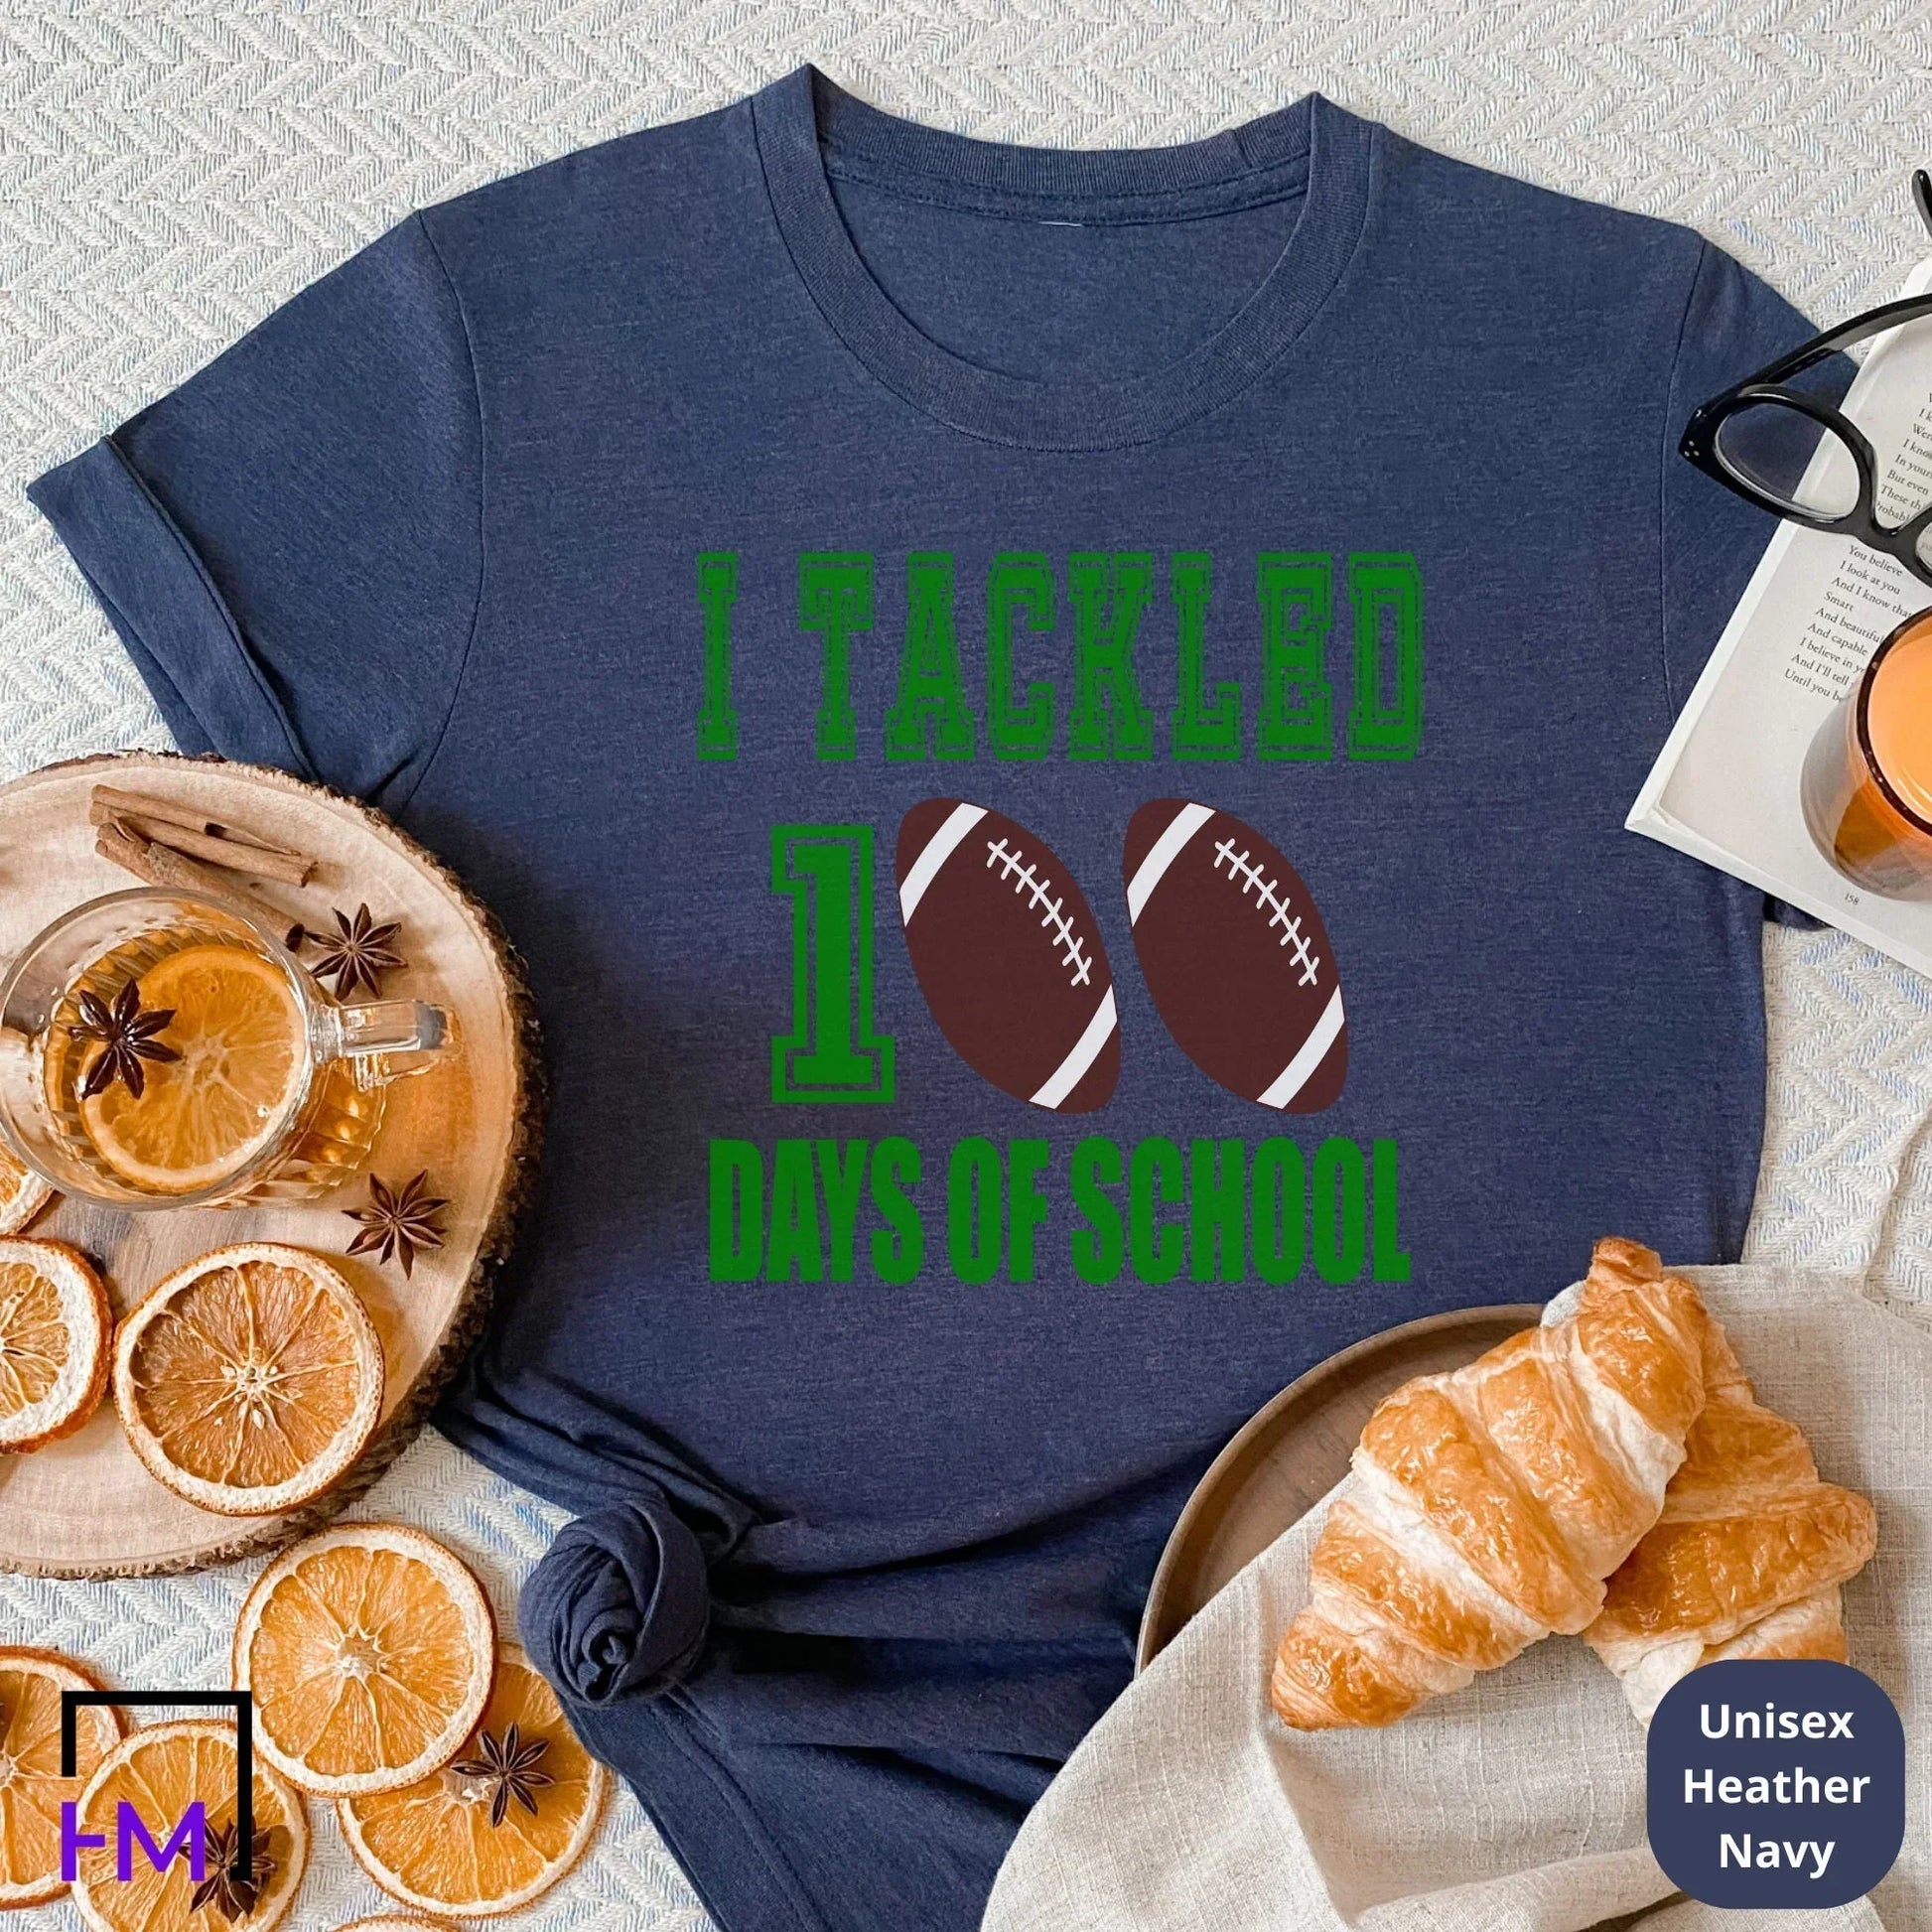 Tackled 100 Days of School Shirt